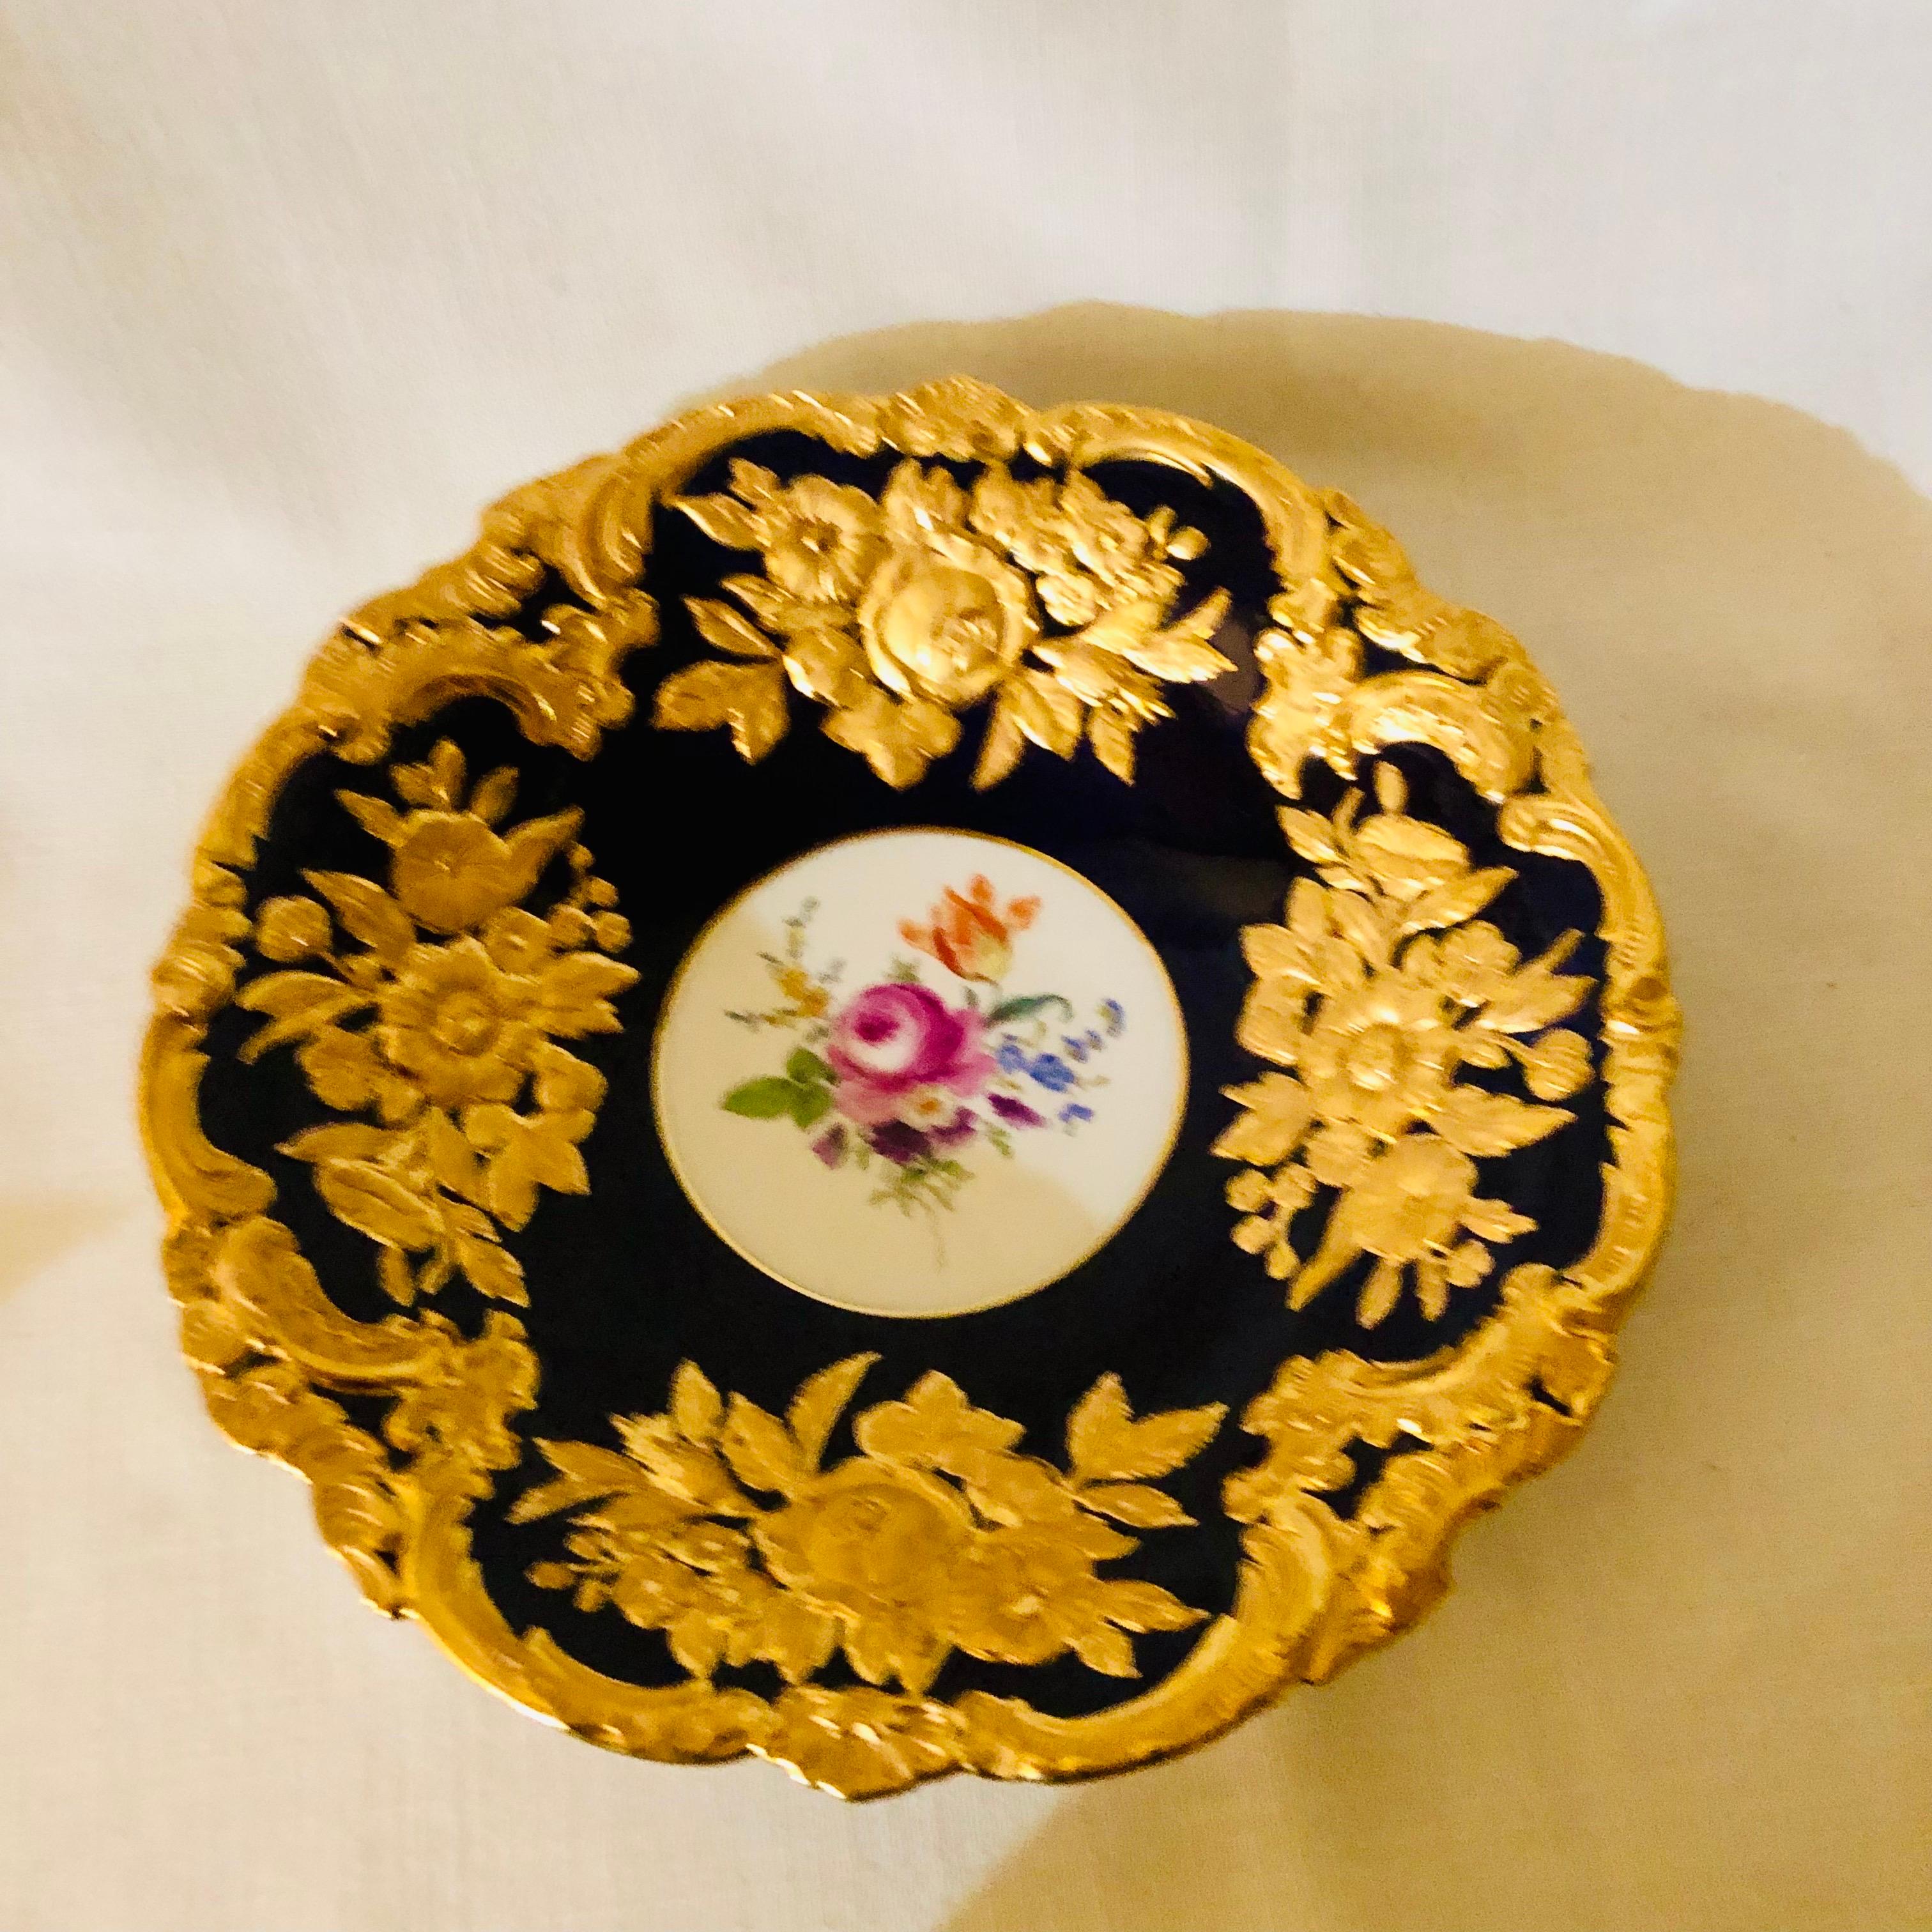 This is a stunning cobalt Meissen Charger. It is decorated with raised gilded flowers and leaves. Its fluted border also has heavy gold. It has a central hand-painted bouquet of flowers. It is really a beautiful eye-catching charger, with all its